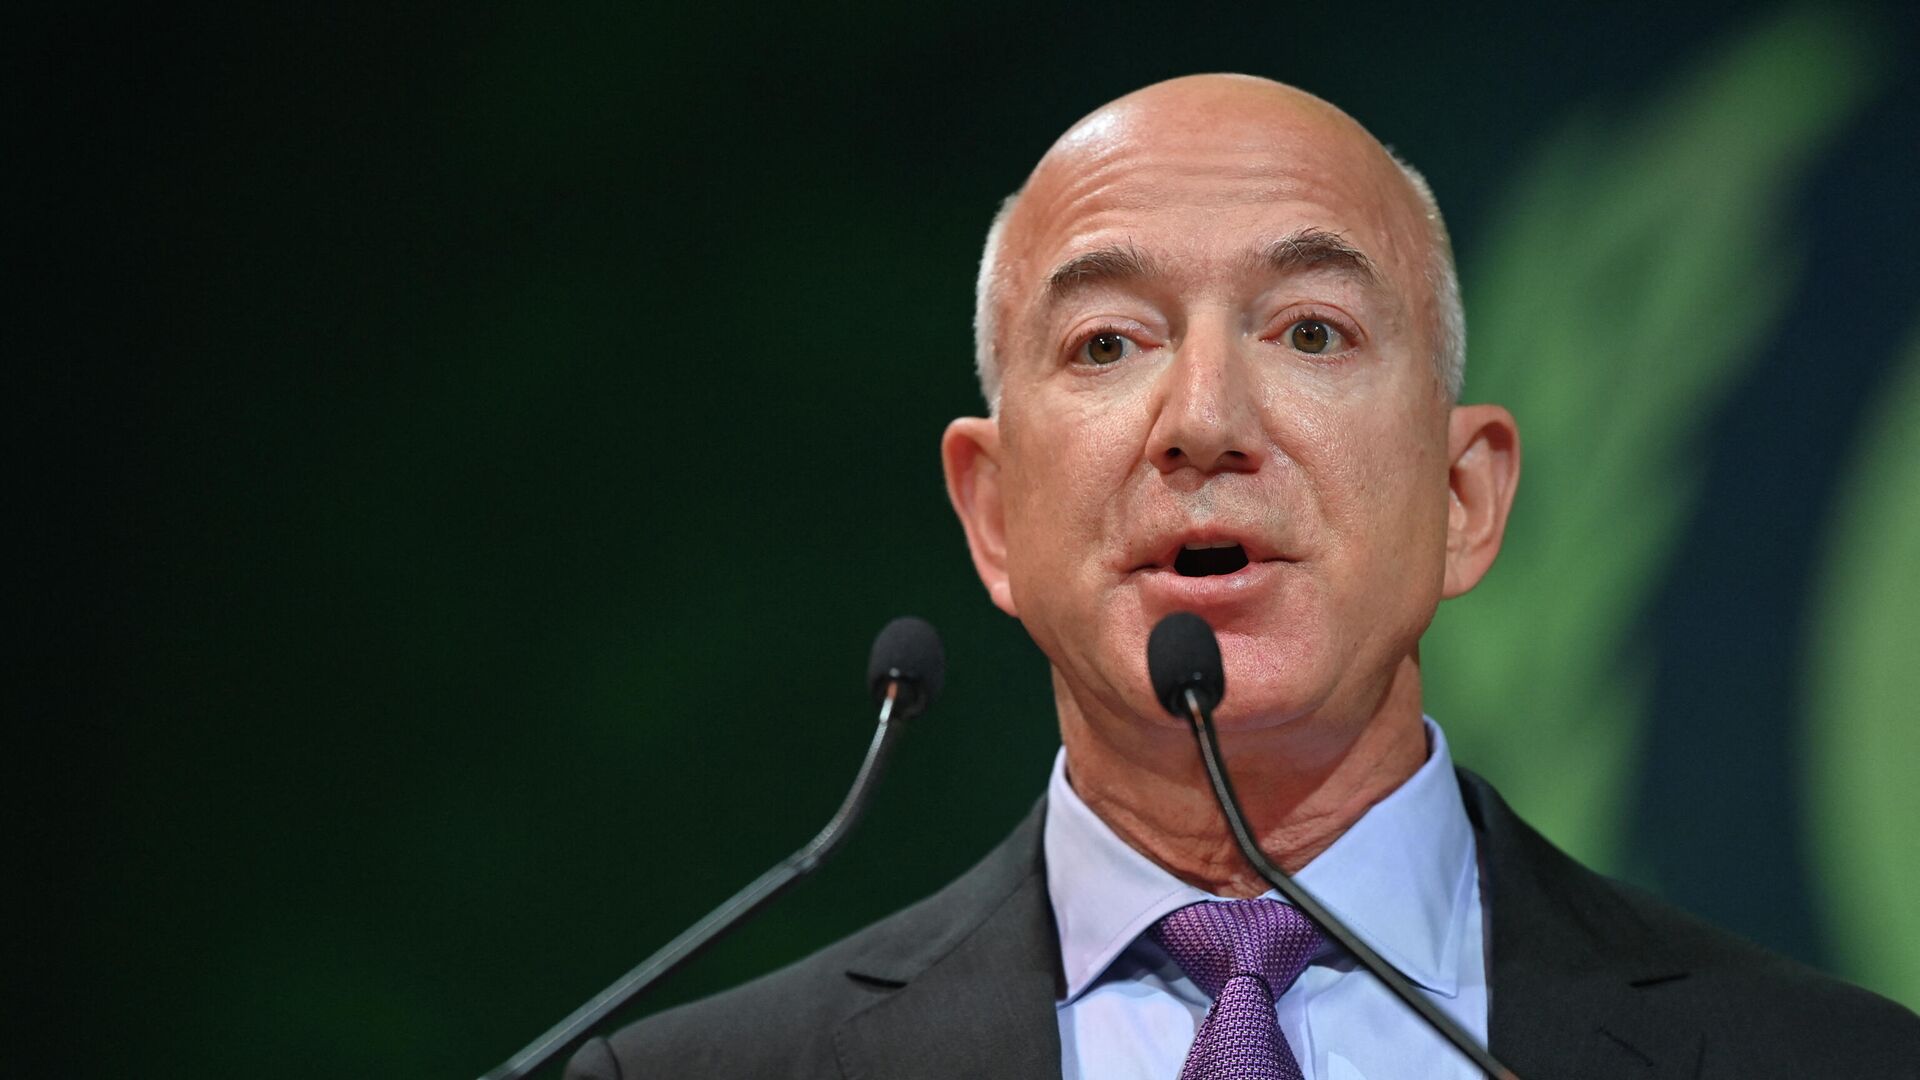 US CEO of Amazon Jeff Bezos attends an Action on Forests and Land Use session, during the COP26 UN Climate Change Conference in Glasgow, Scotland on November 2, 2021. - Sputnik International, 1920, 03.07.2022